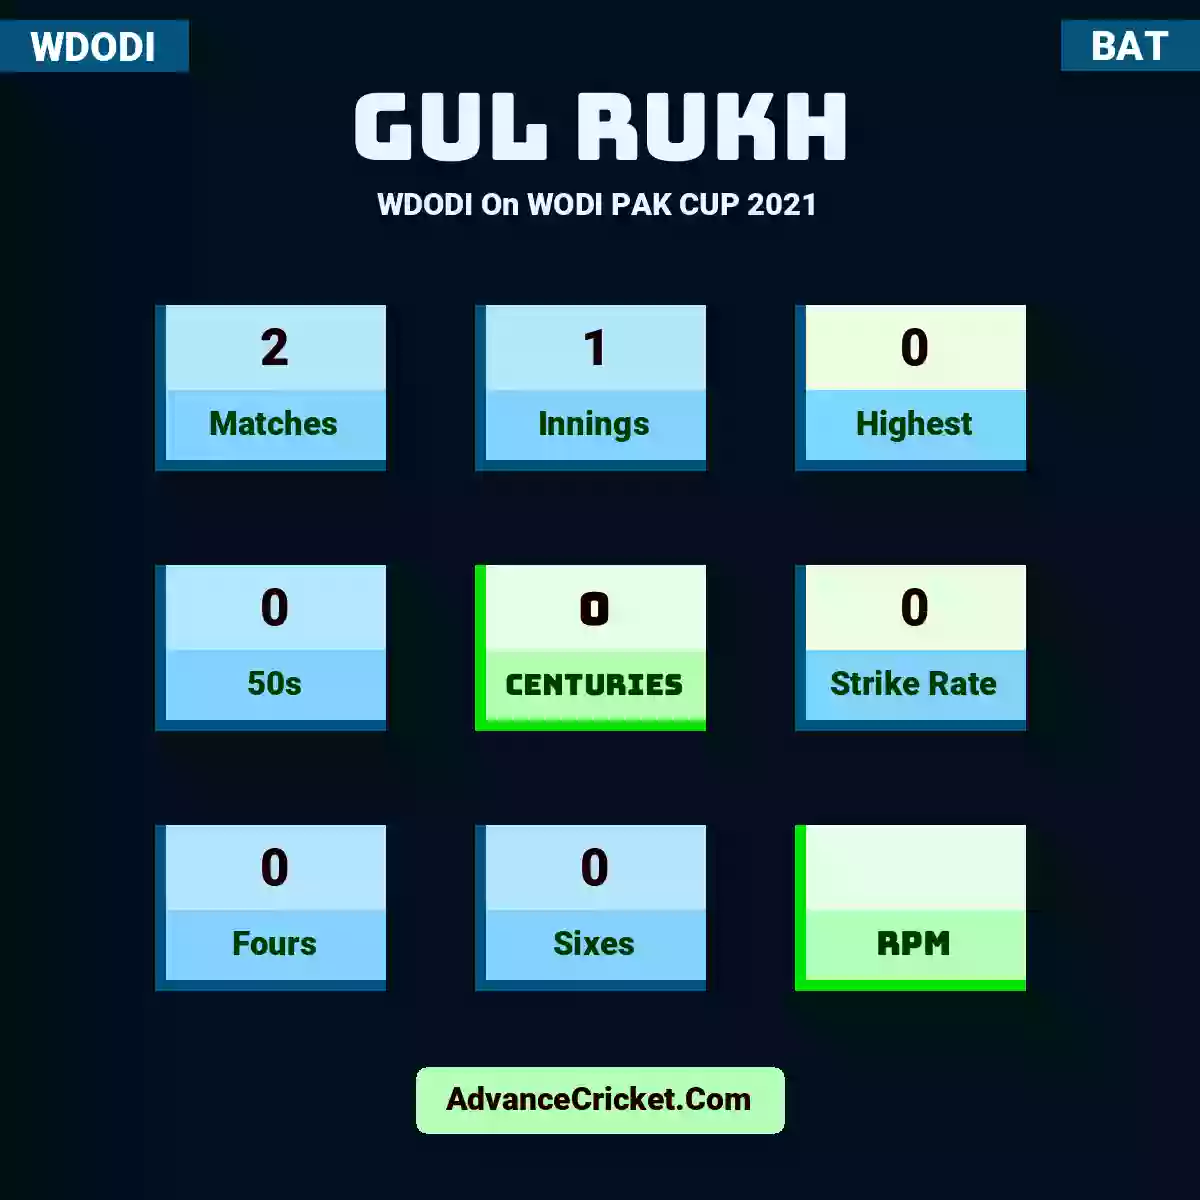 Gul Rukh WDODI  On WODI PAK CUP 2021, Gul Rukh played 2 matches, scored 0 runs as highest, 0 half-centuries, and 0 centuries, with a strike rate of 0. G.Rukh hit 0 fours and 0 sixes.